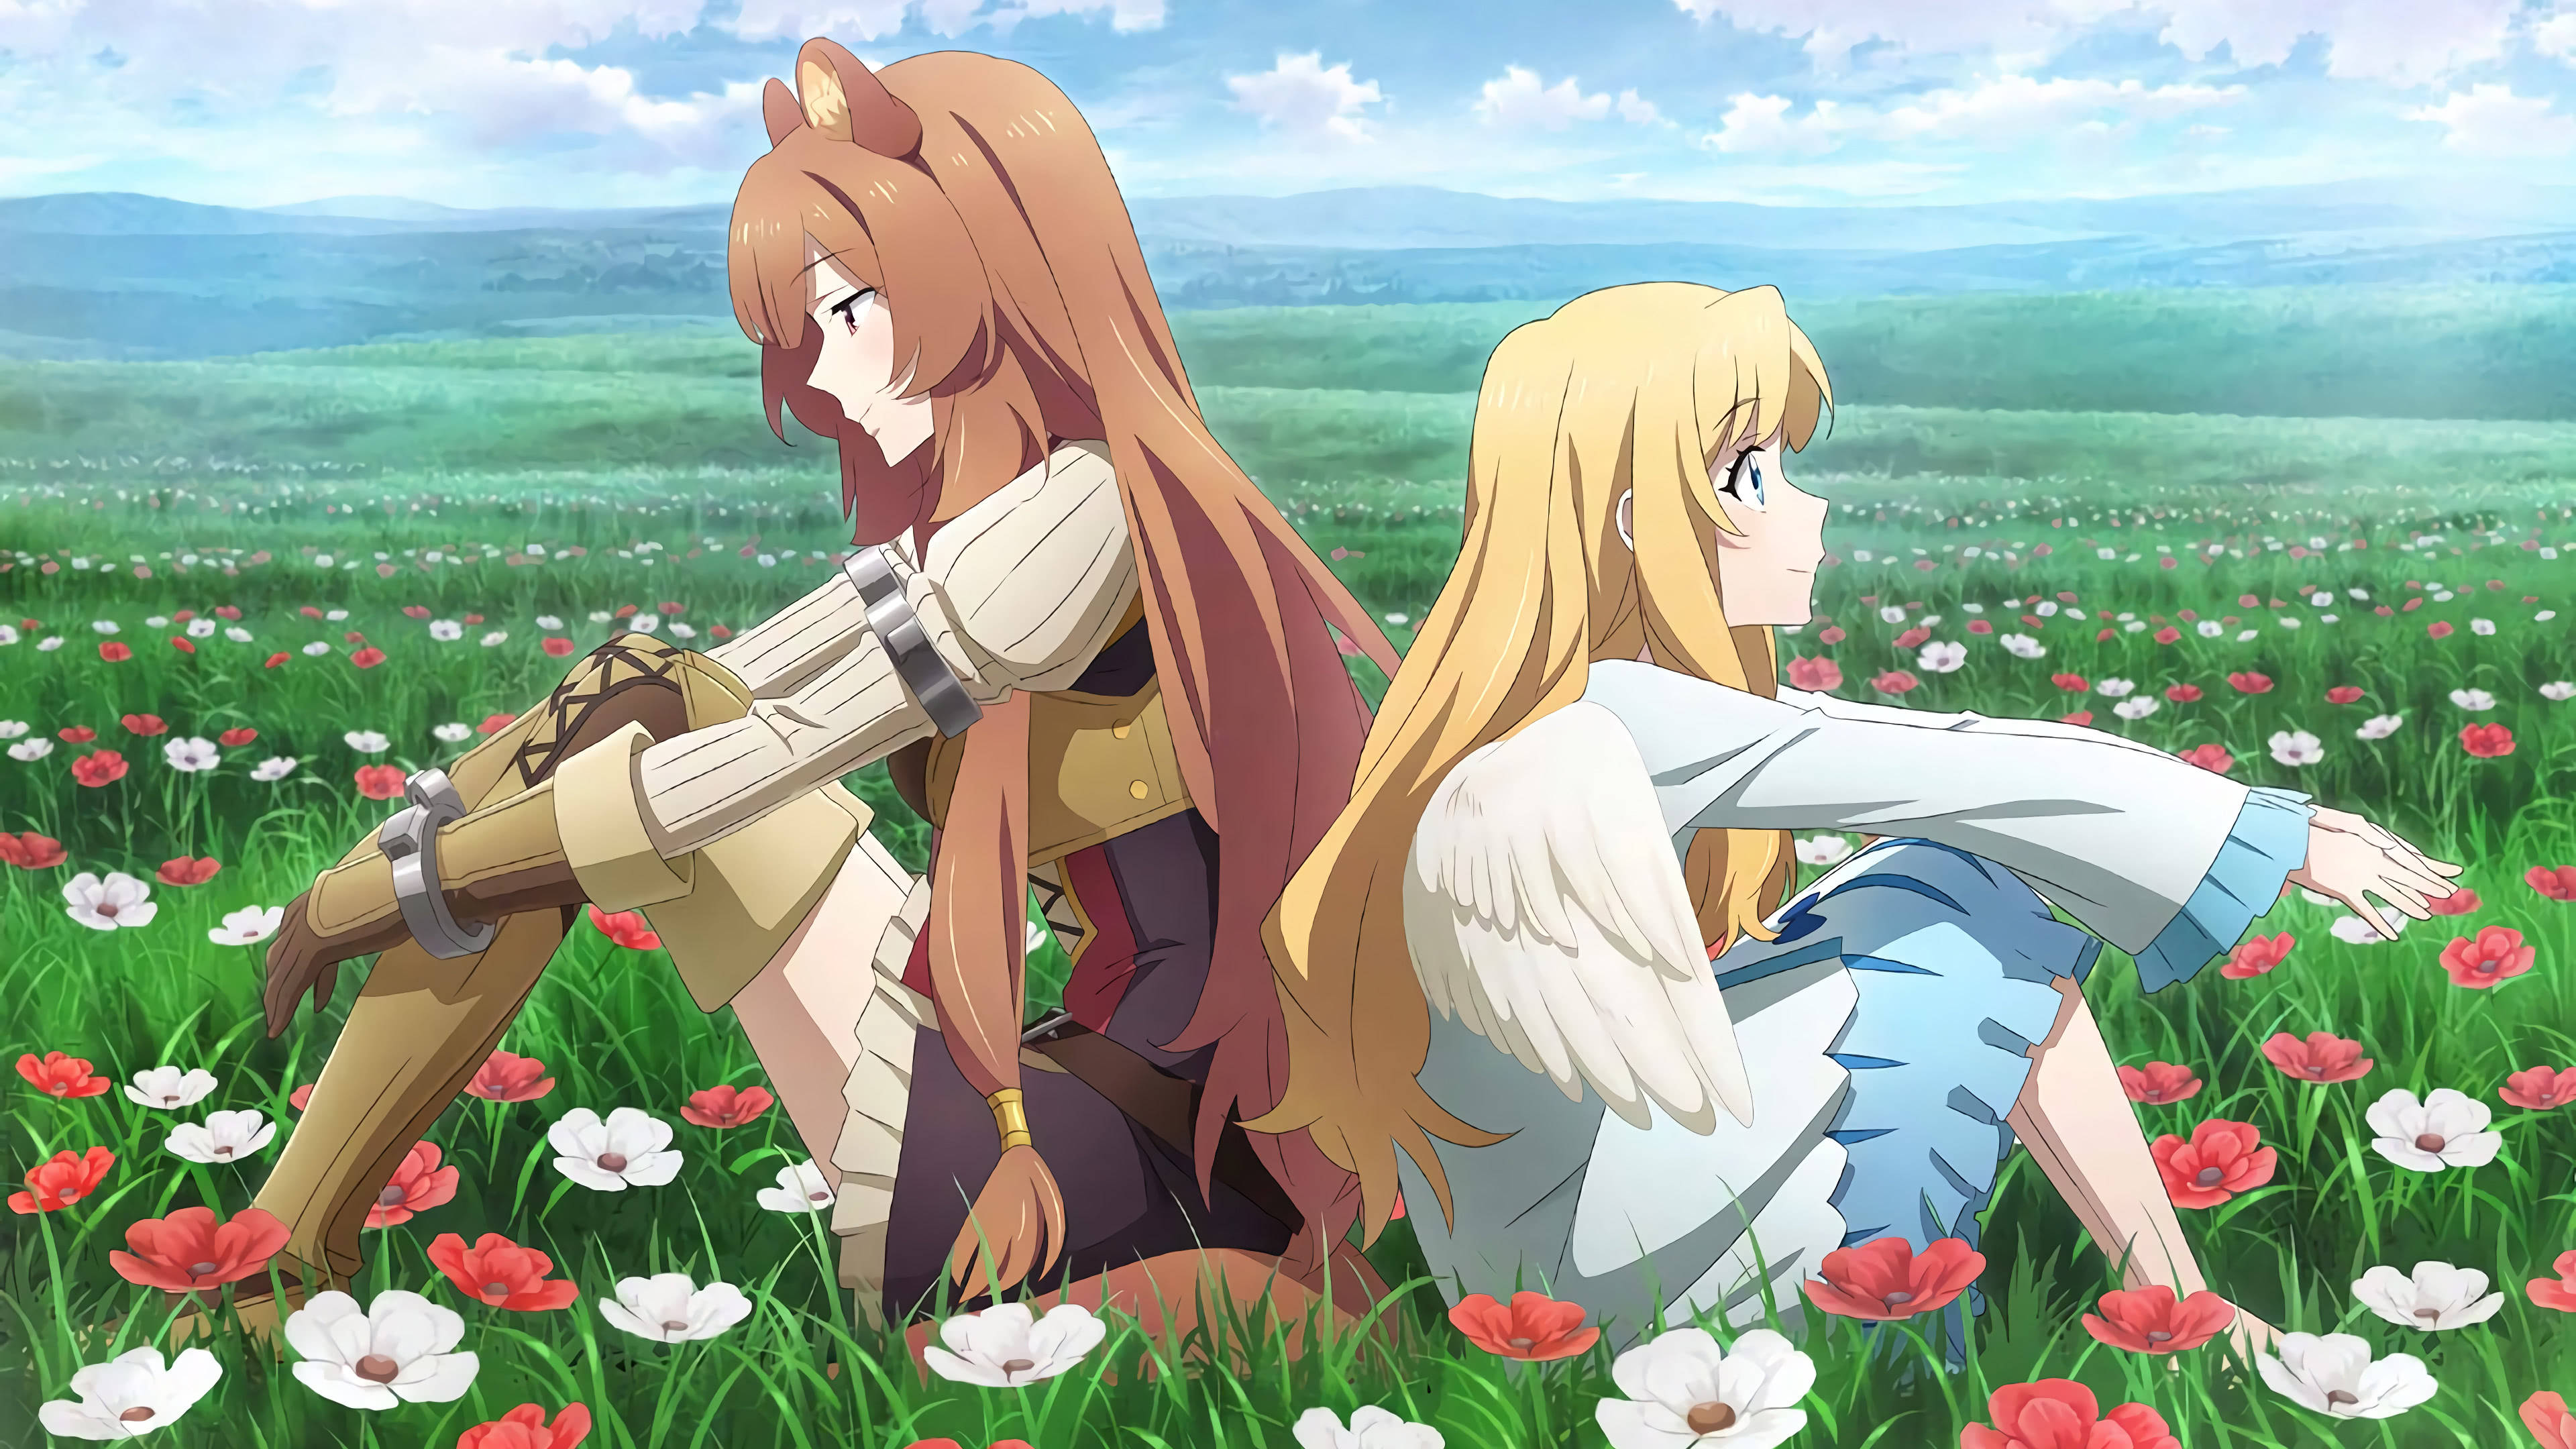 Two Anime Girls Sitting In A Field Of Flowers Background